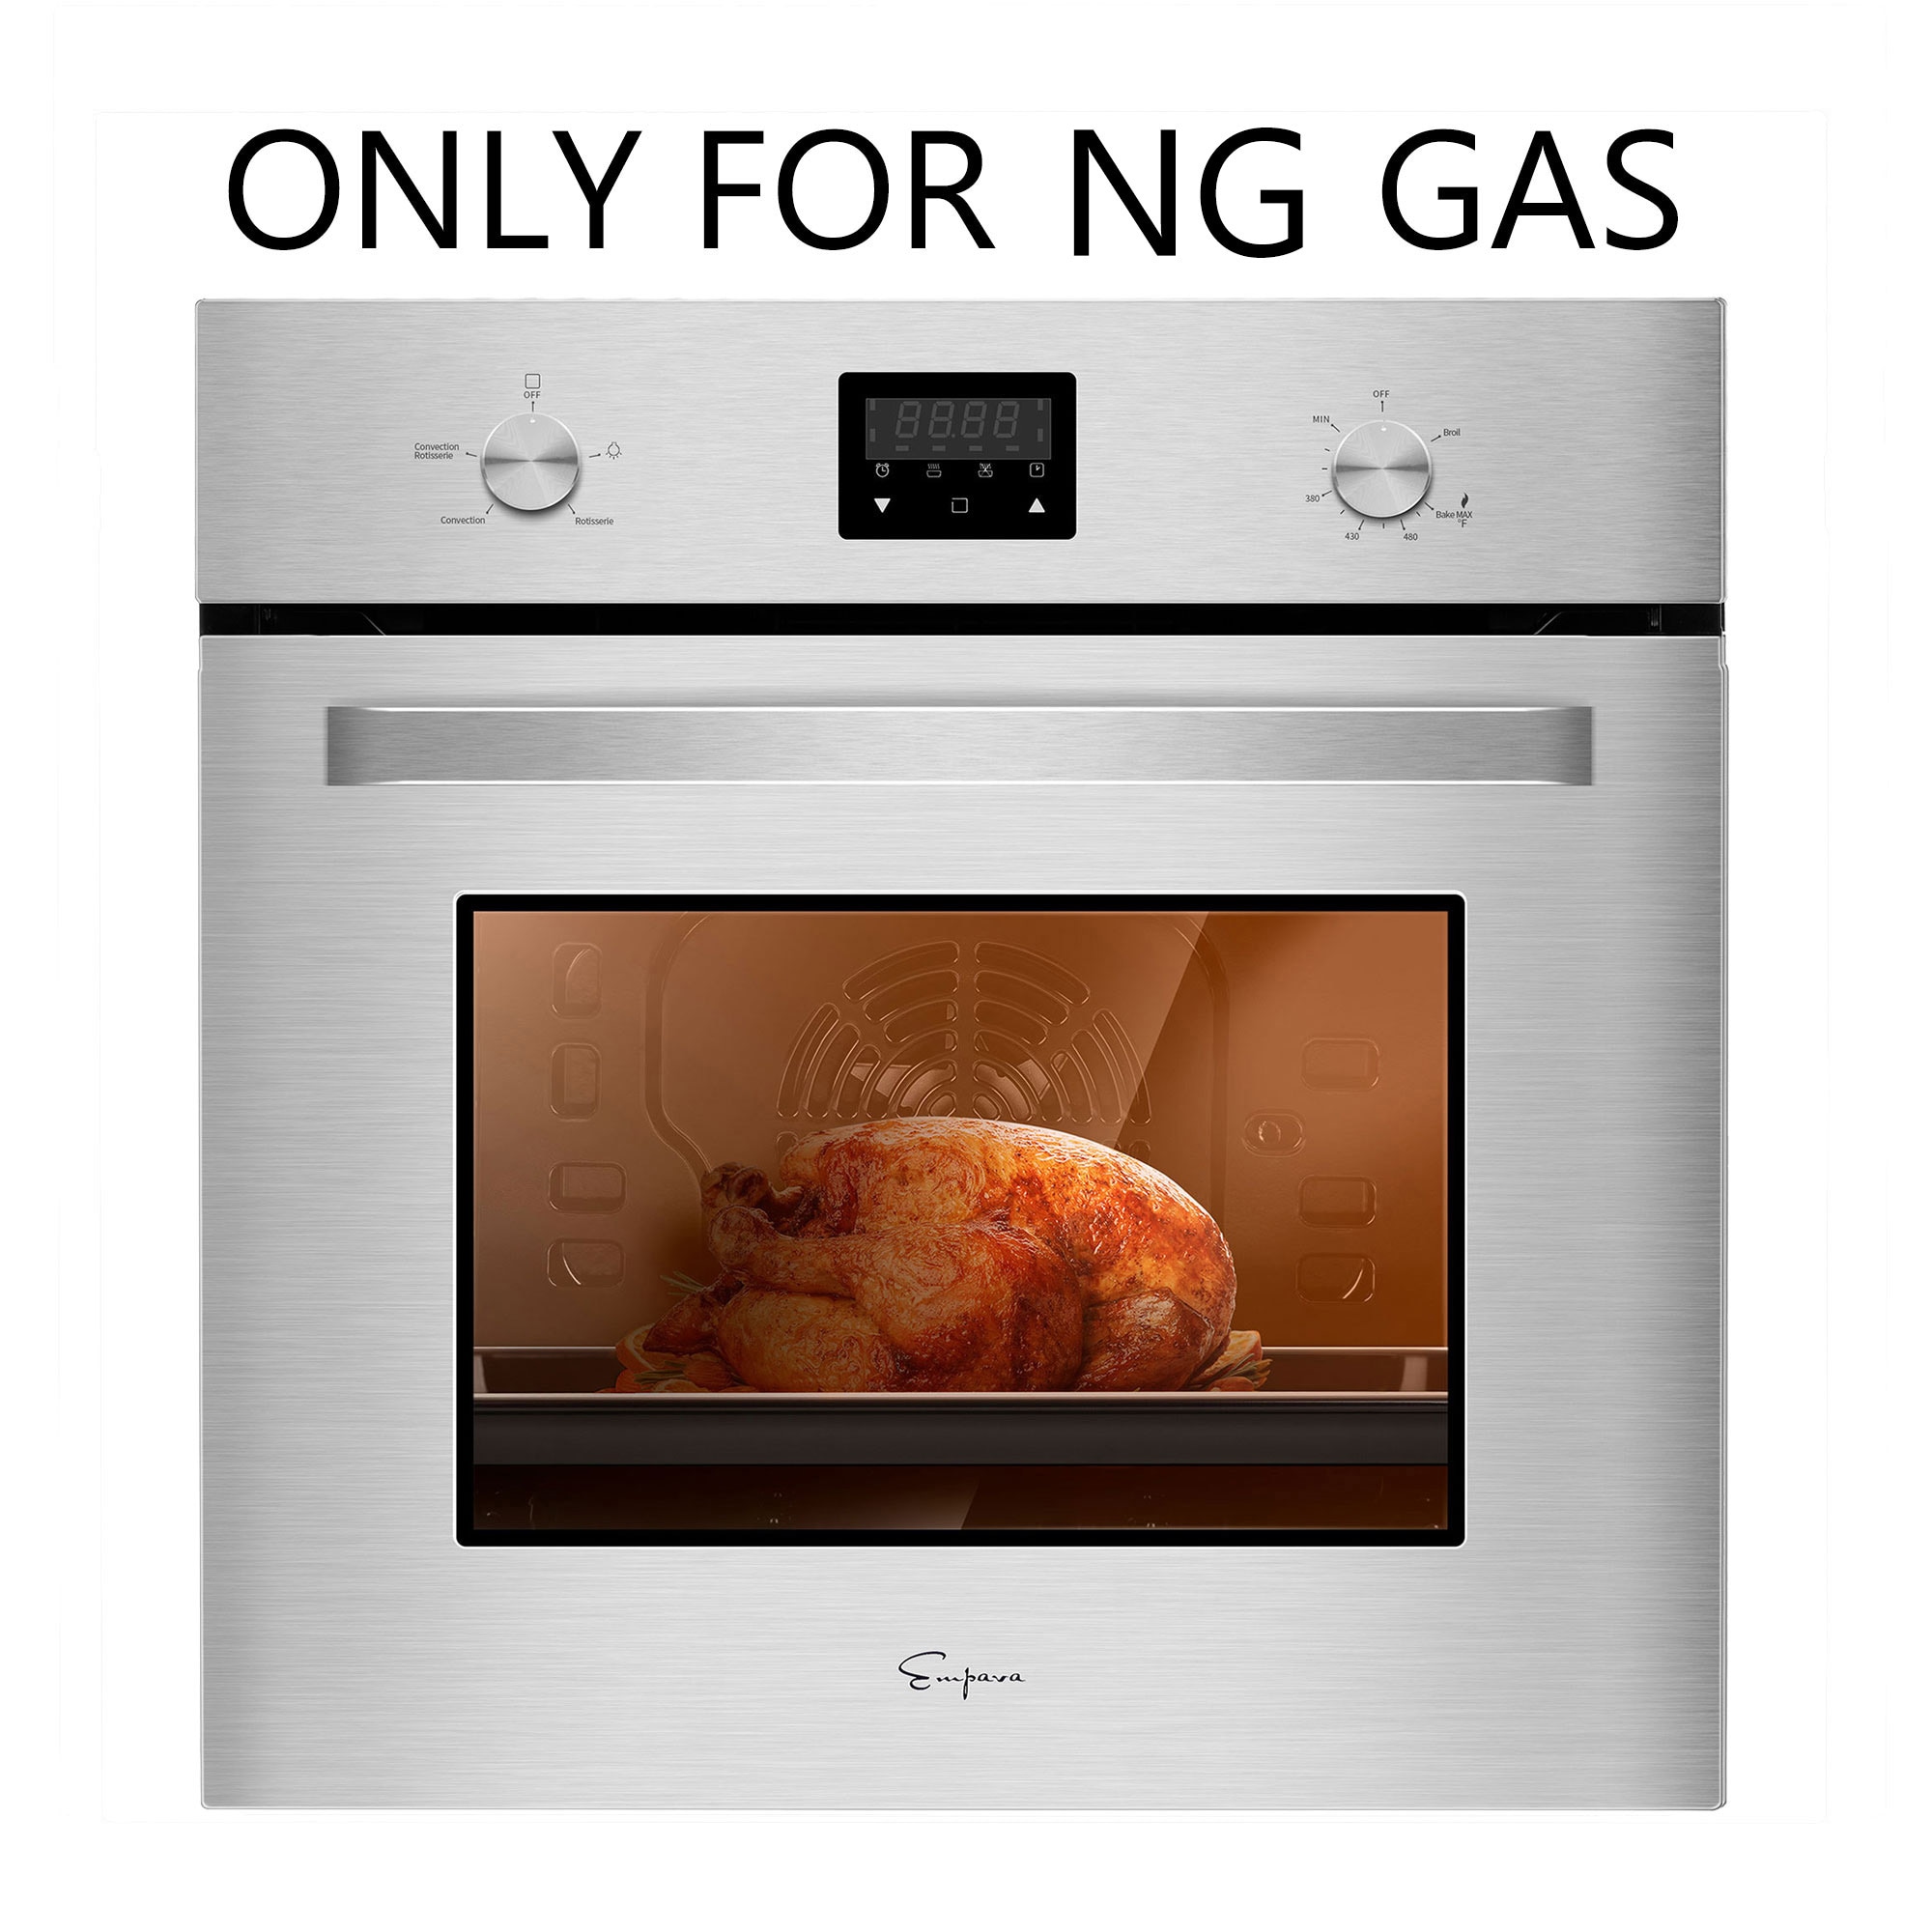 24-in Single Gas Wall Oven with Convection (Stainless Steel) | - Empava EMPV-24WO09